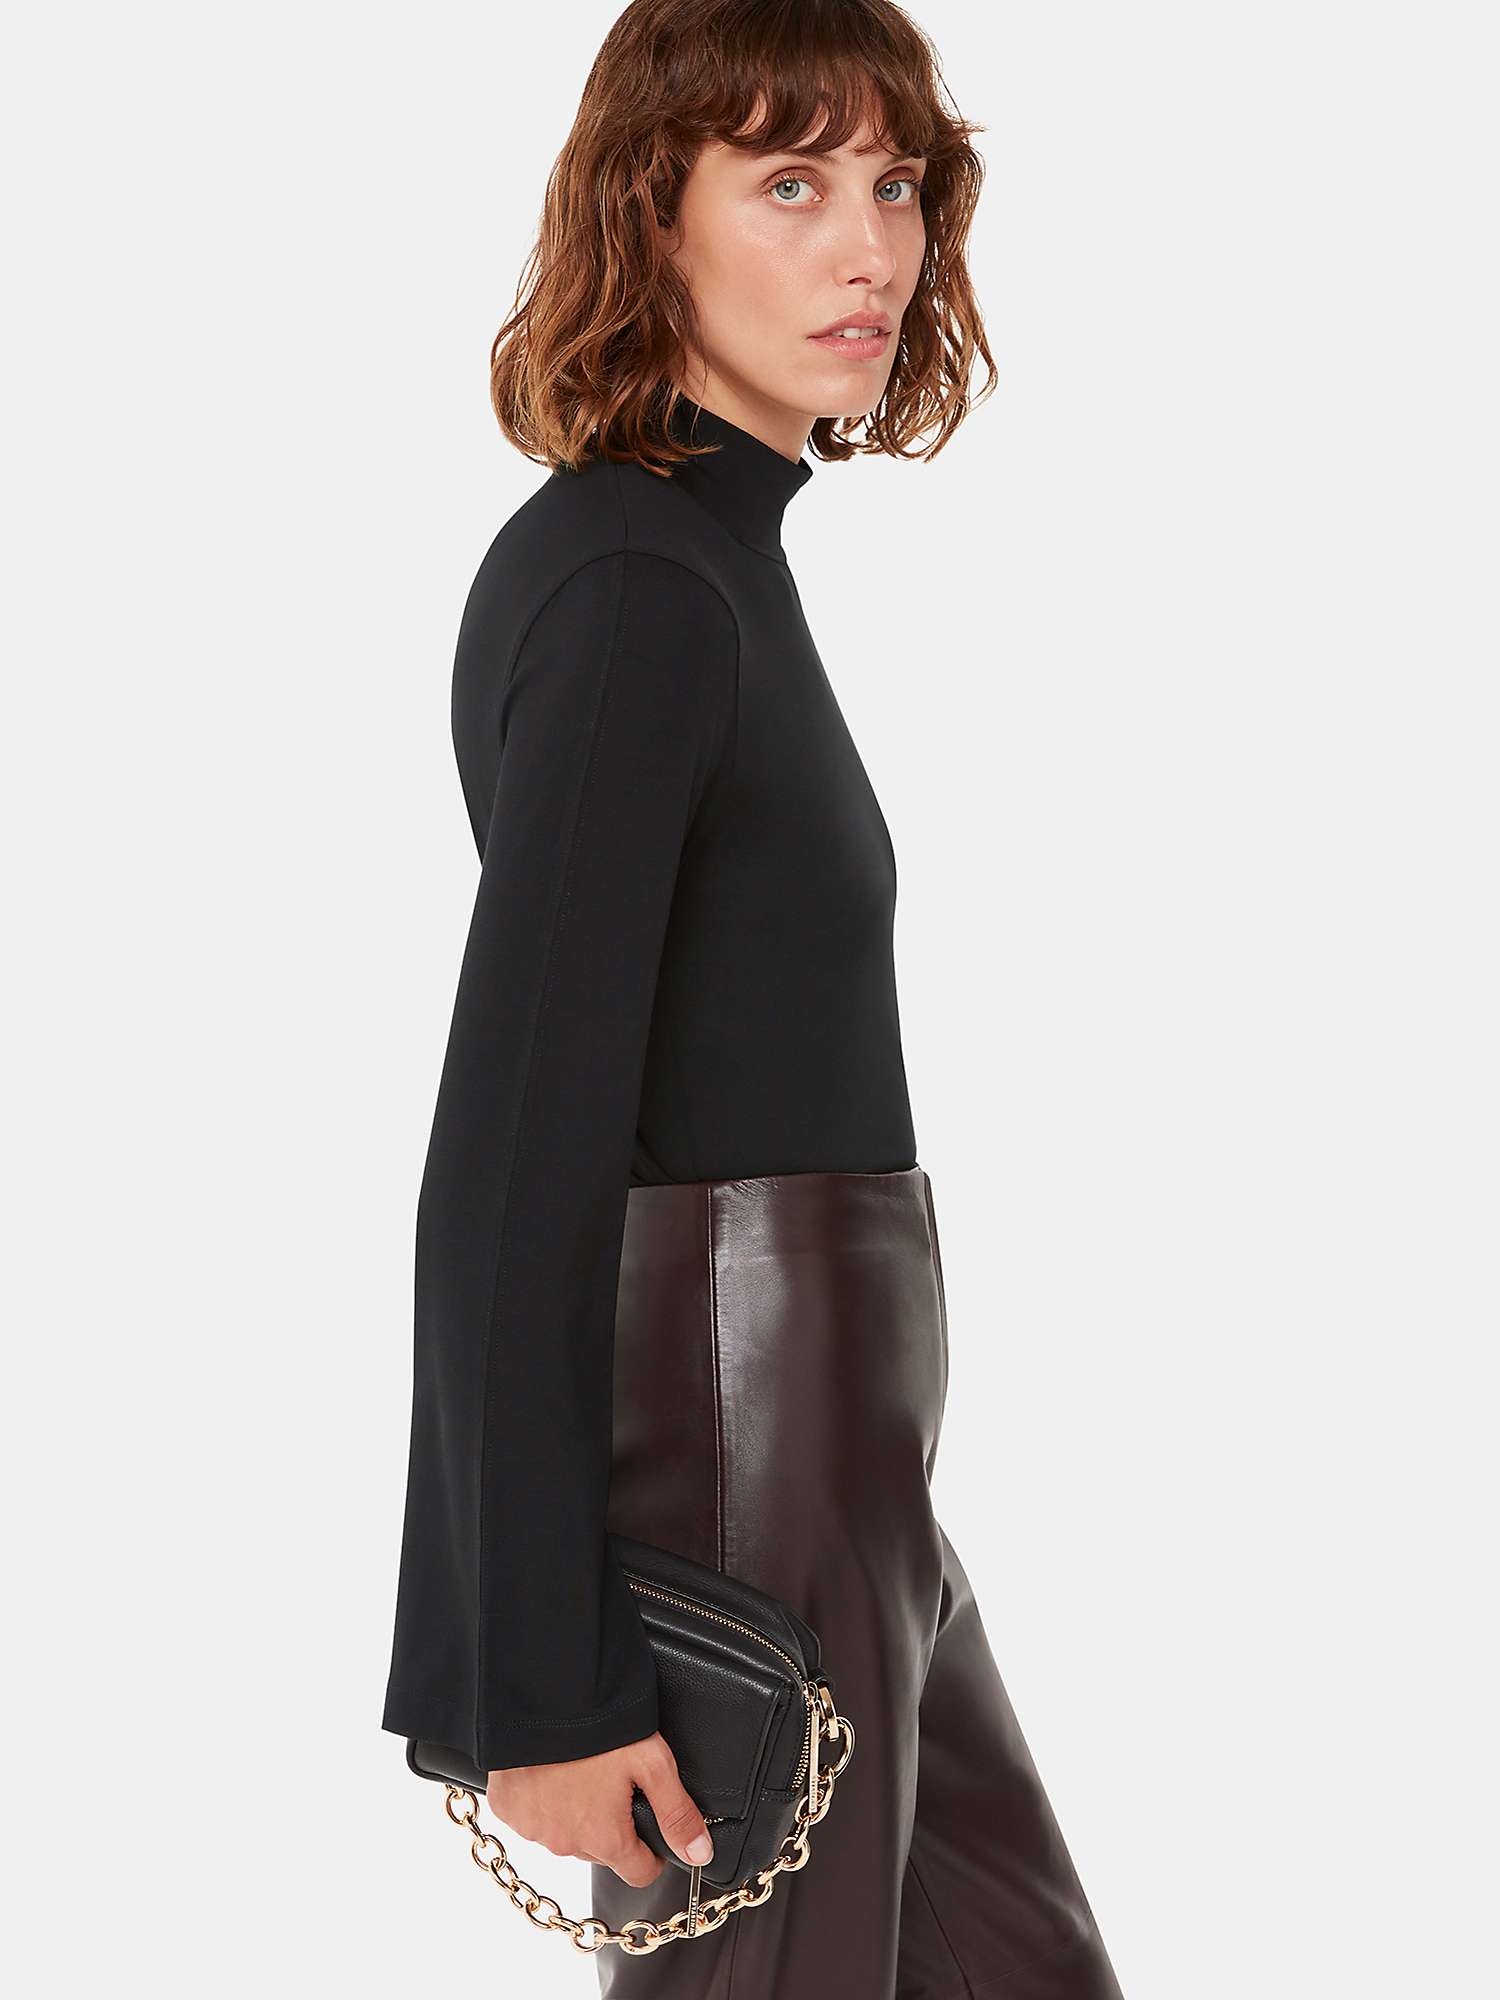 Buy Whistles Wide Sleeve High Neck Top Online at johnlewis.com